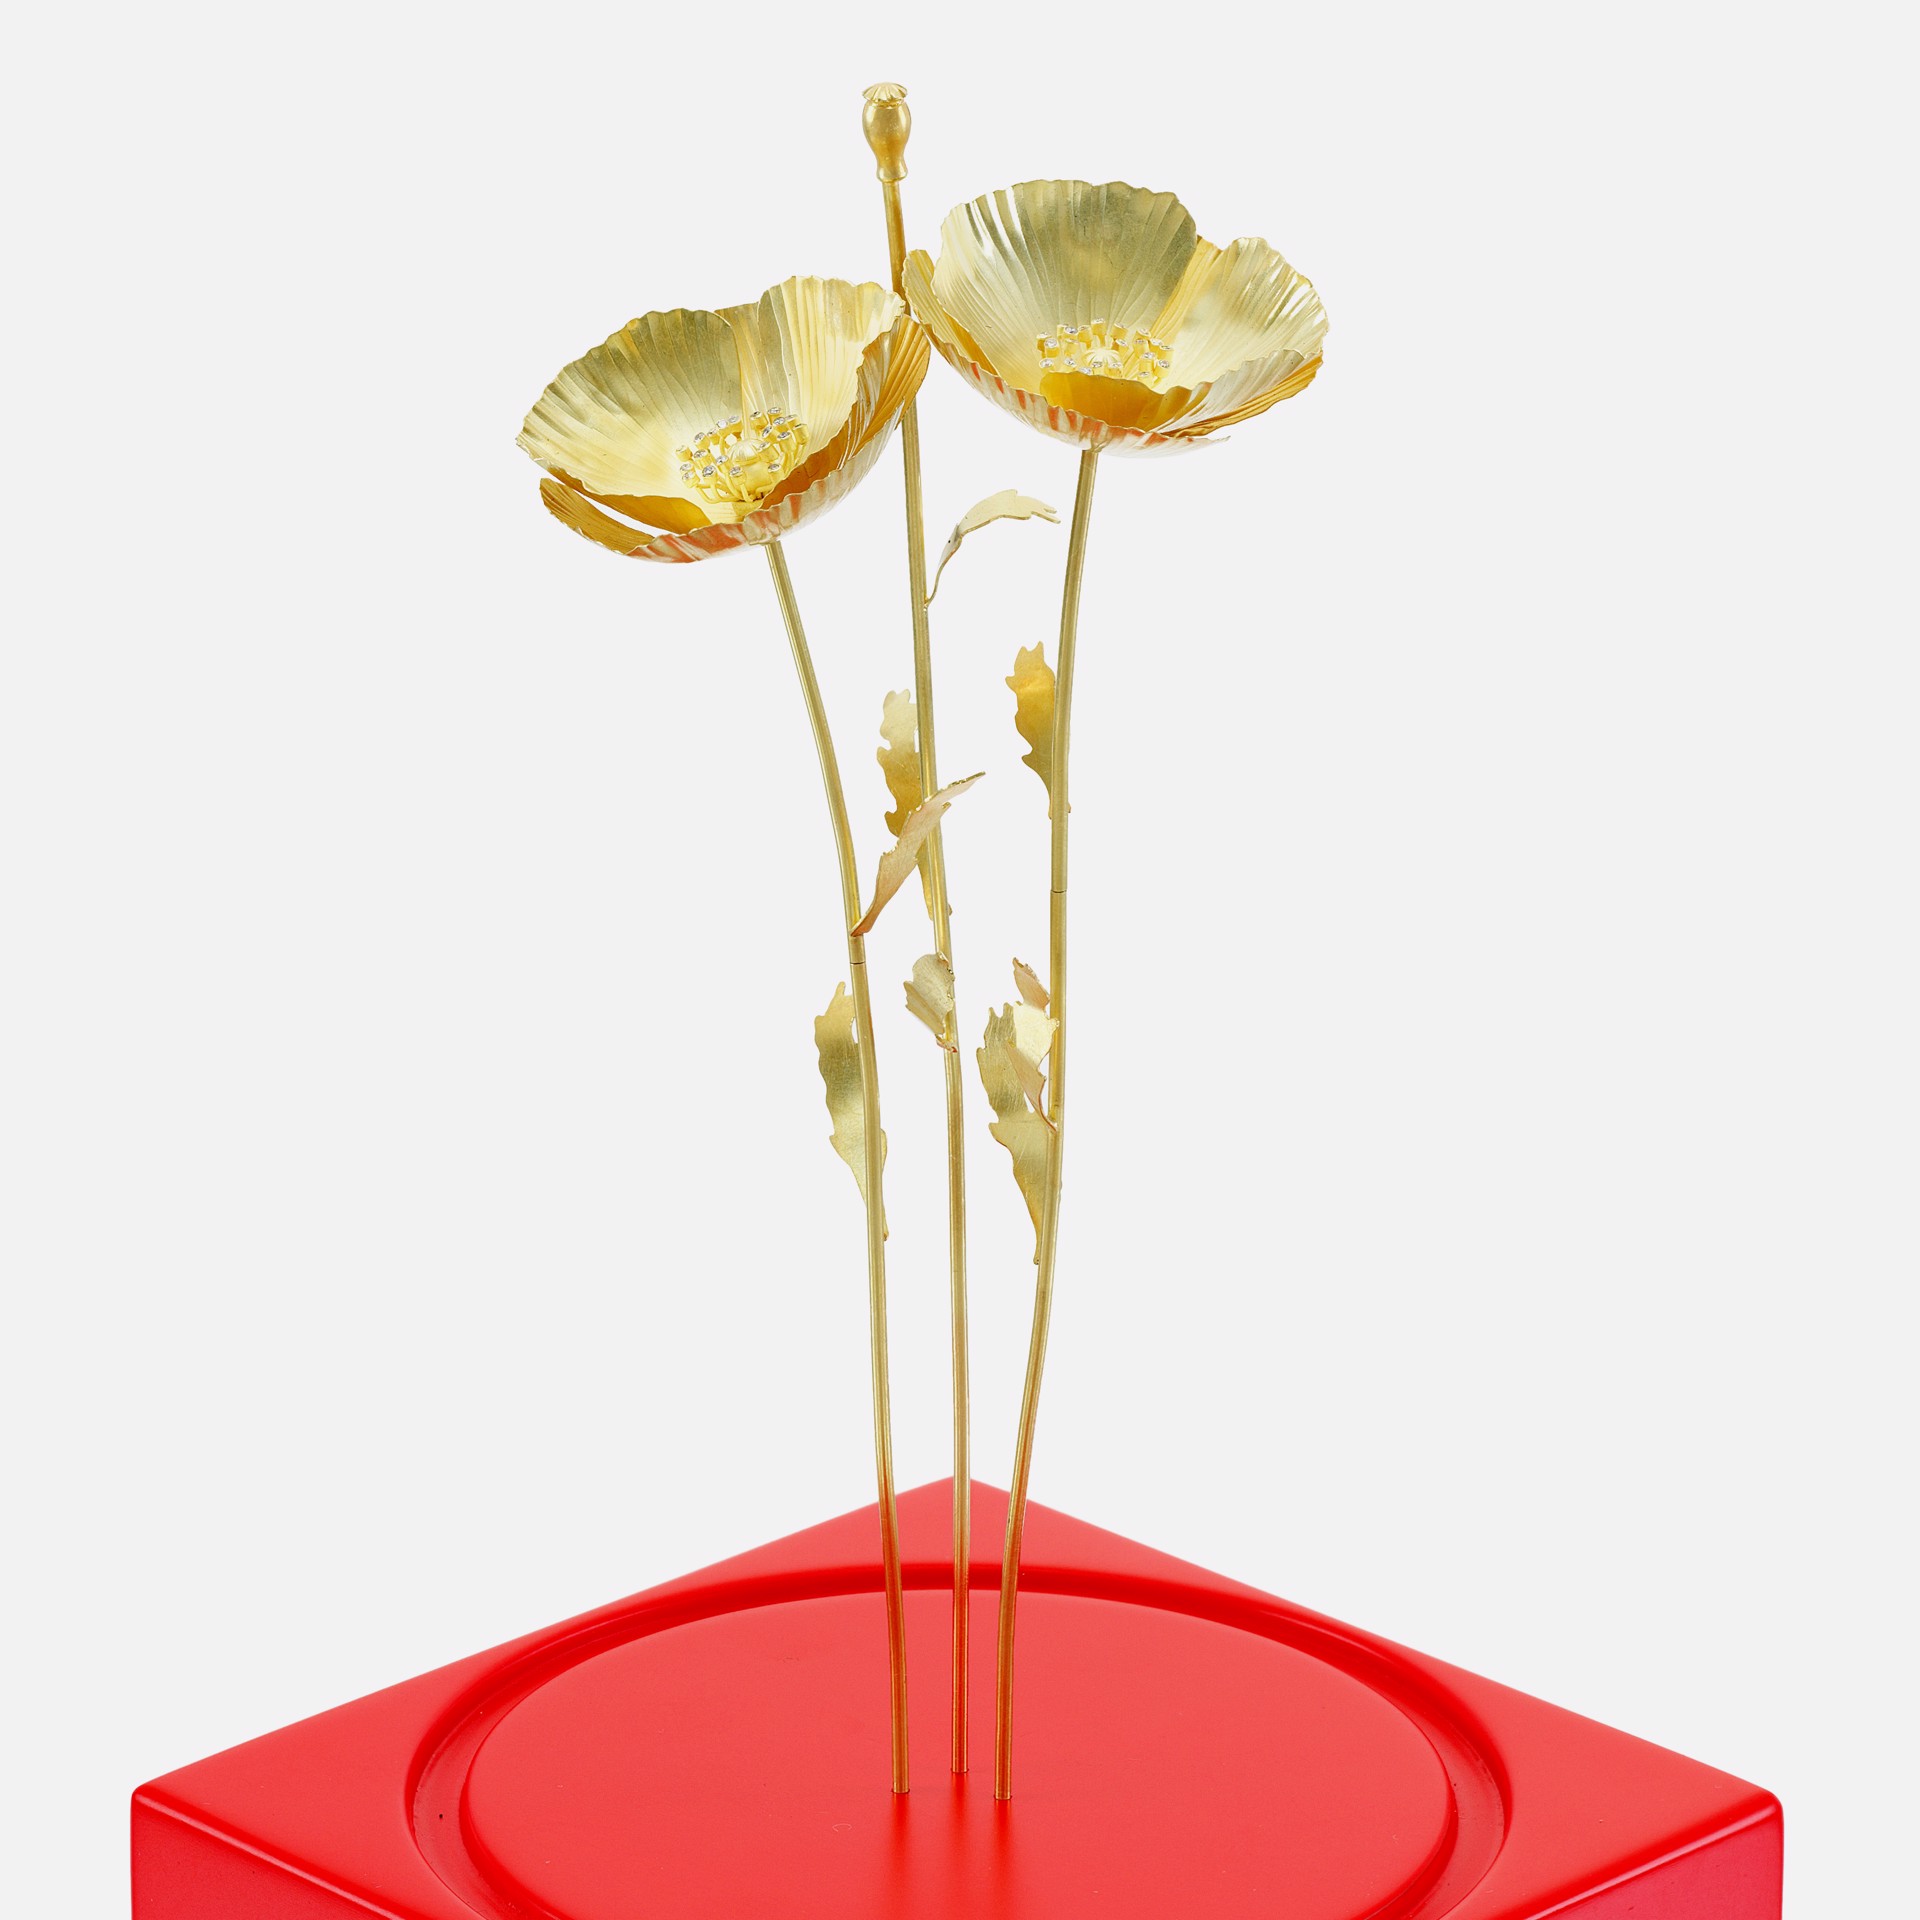 Poppy Sculpture Detachable Gold and Diamond Earrings/Pins by Christopher Thompson Royds